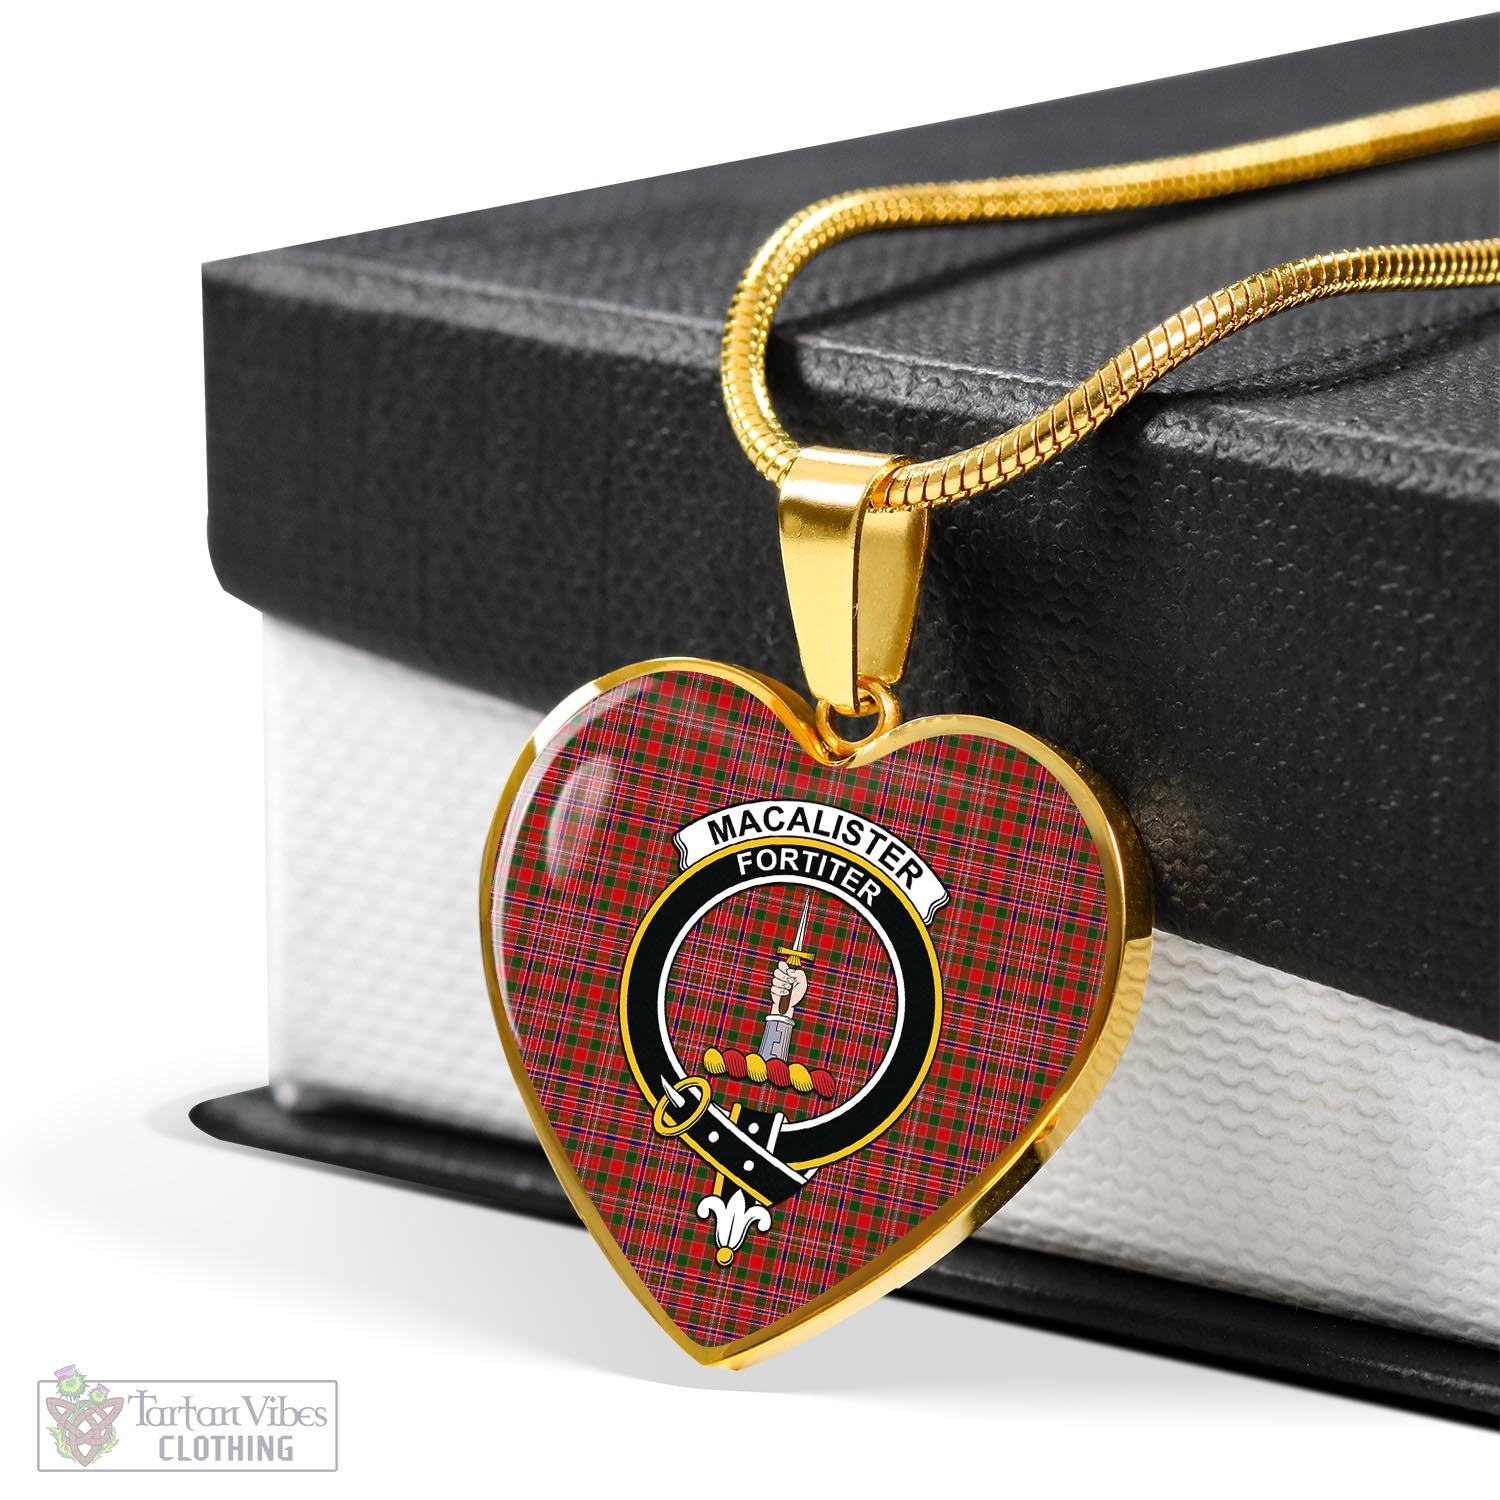 Tartan Vibes Clothing MacAlister Modern Tartan Heart Necklace with Family Crest